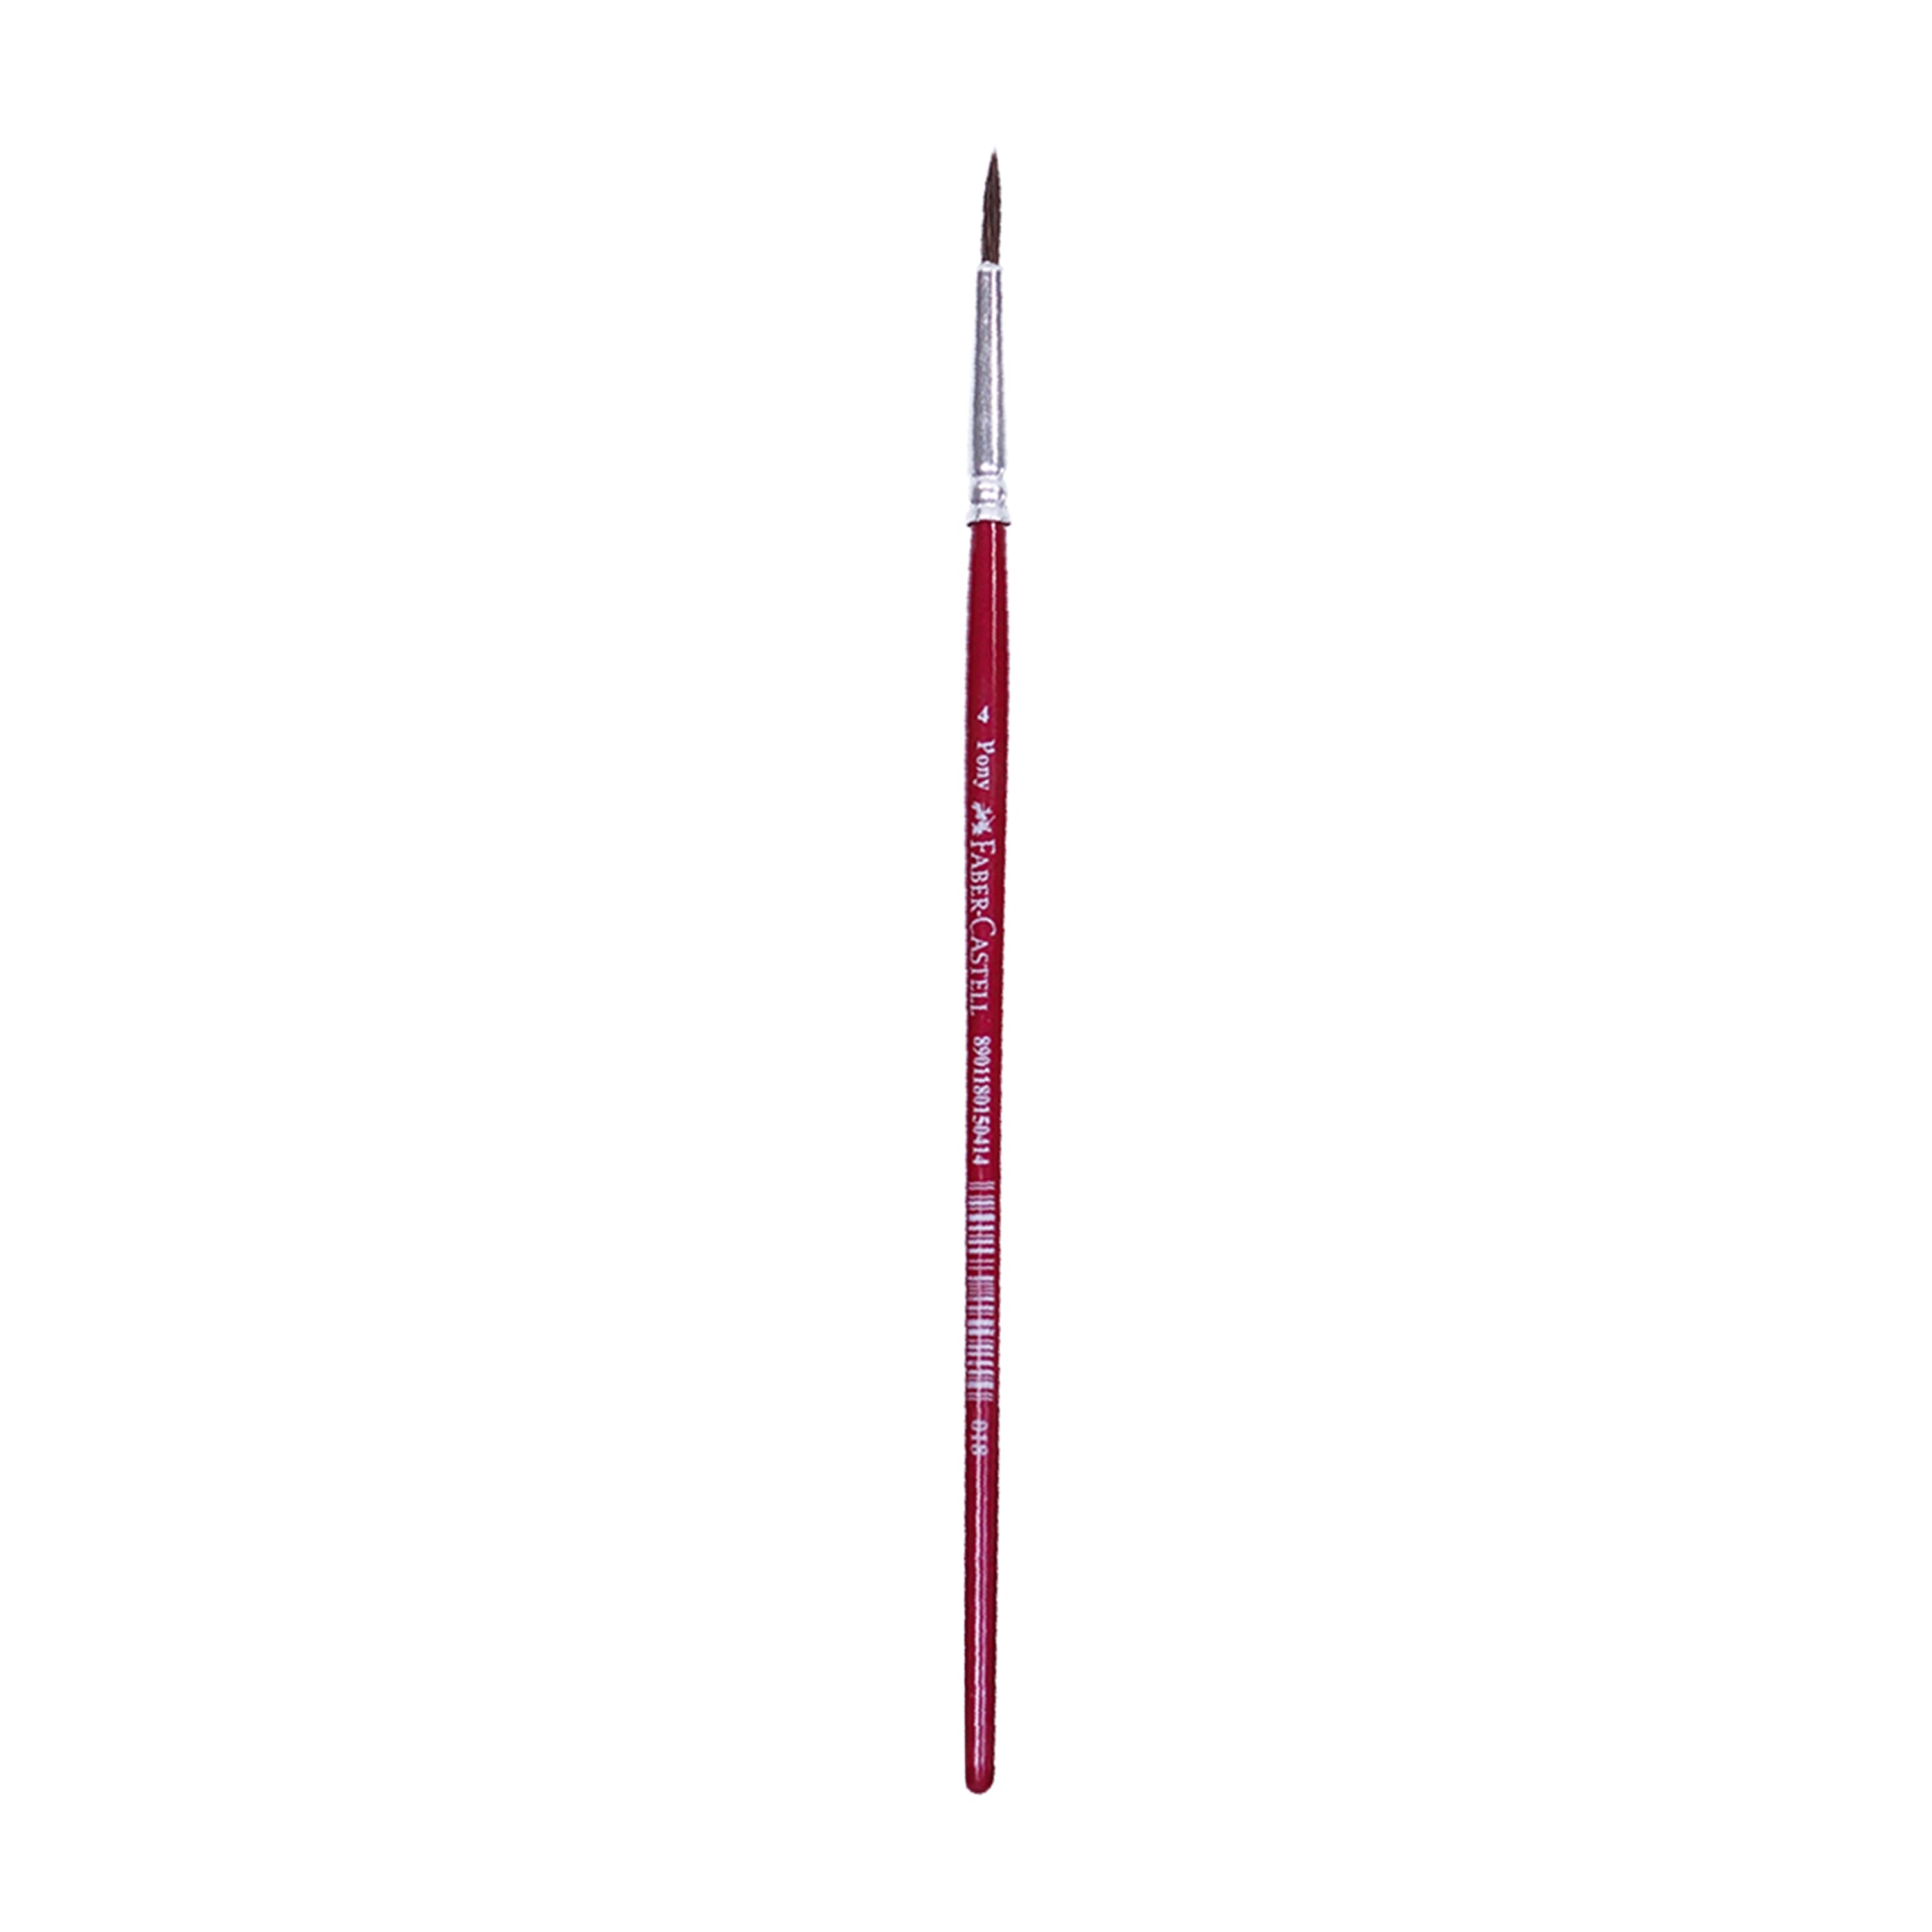 Faber Castell Paint Brush - Pony Hair Round Size 4, 1pc